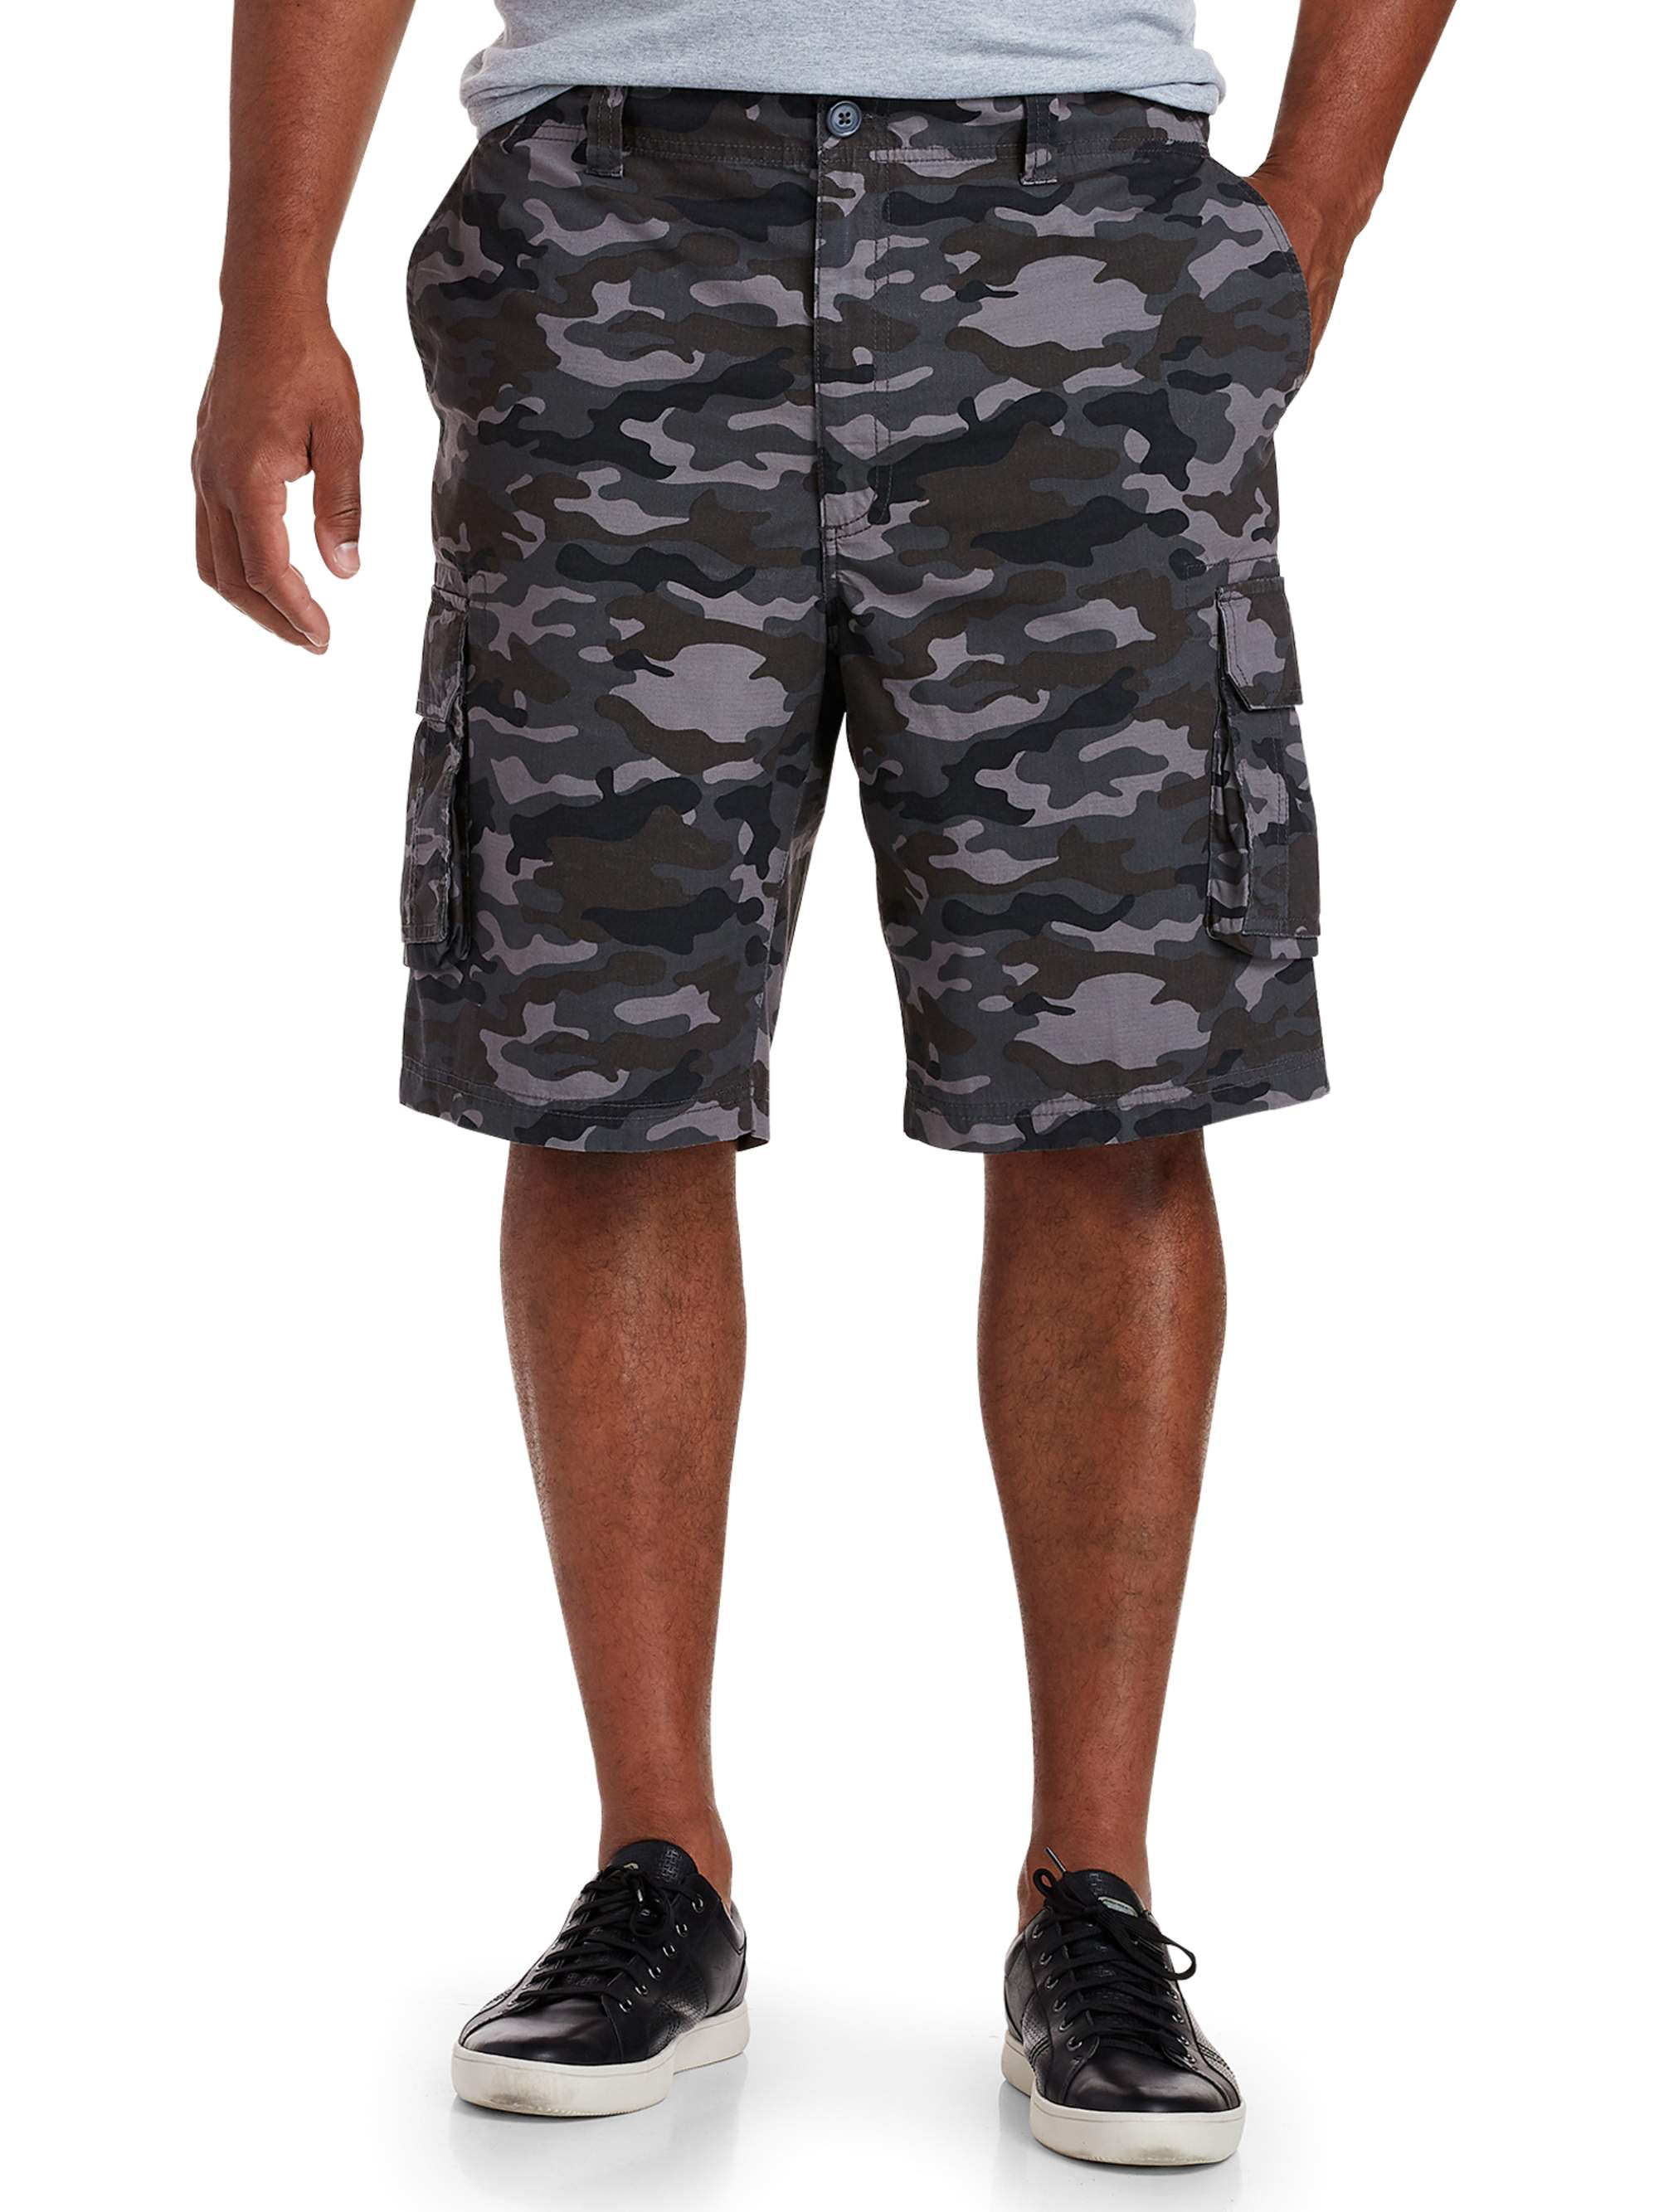 Essentials Mens Big & Tall Stretch Woven Training Short fit by DXL 